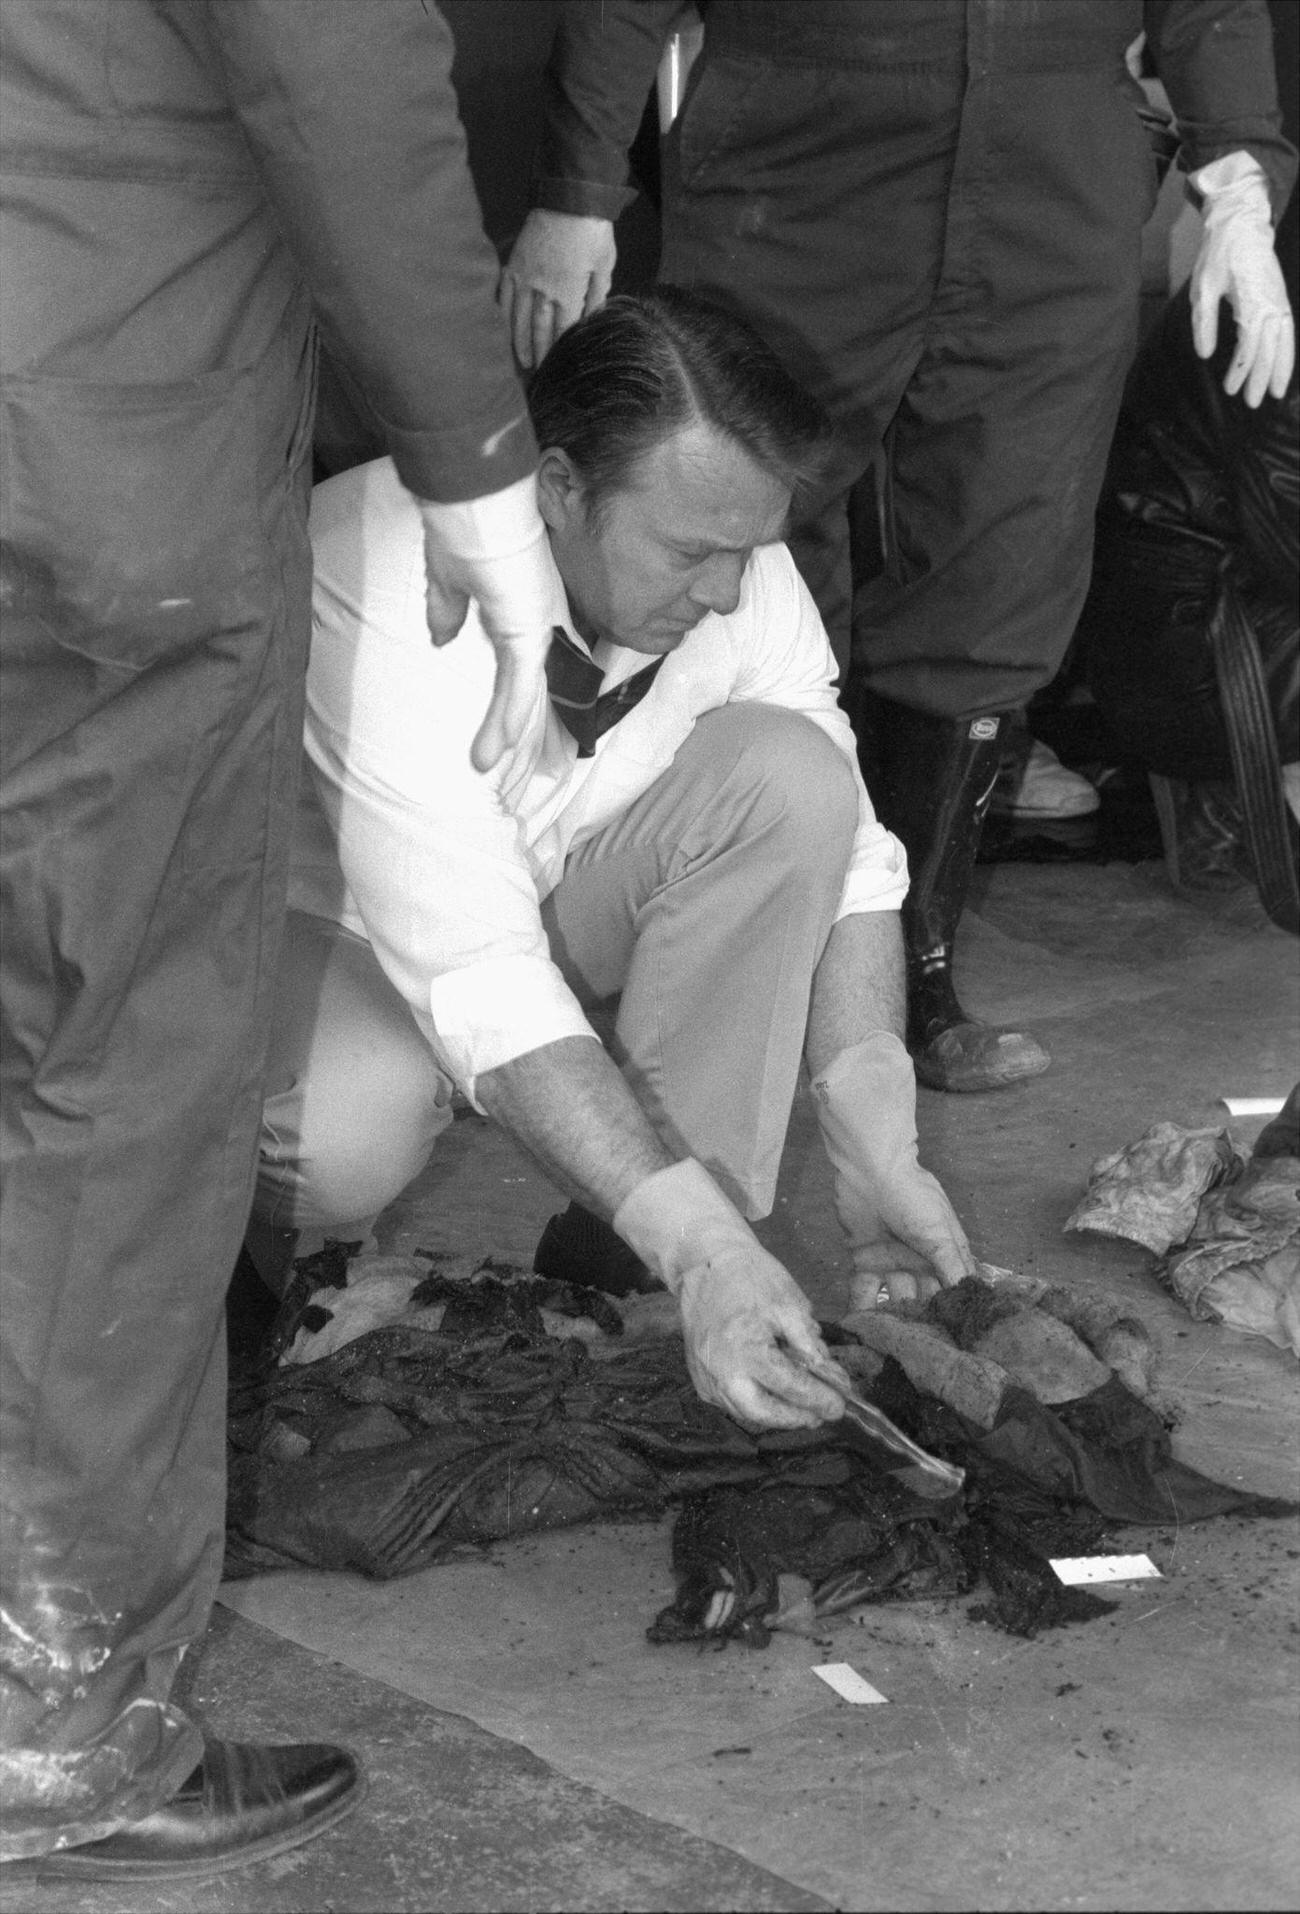 Police Detective Sorts Through Clothing From Some Of The 87 Victims Of The Fire At The Happy Land Social Club In The Bronx.